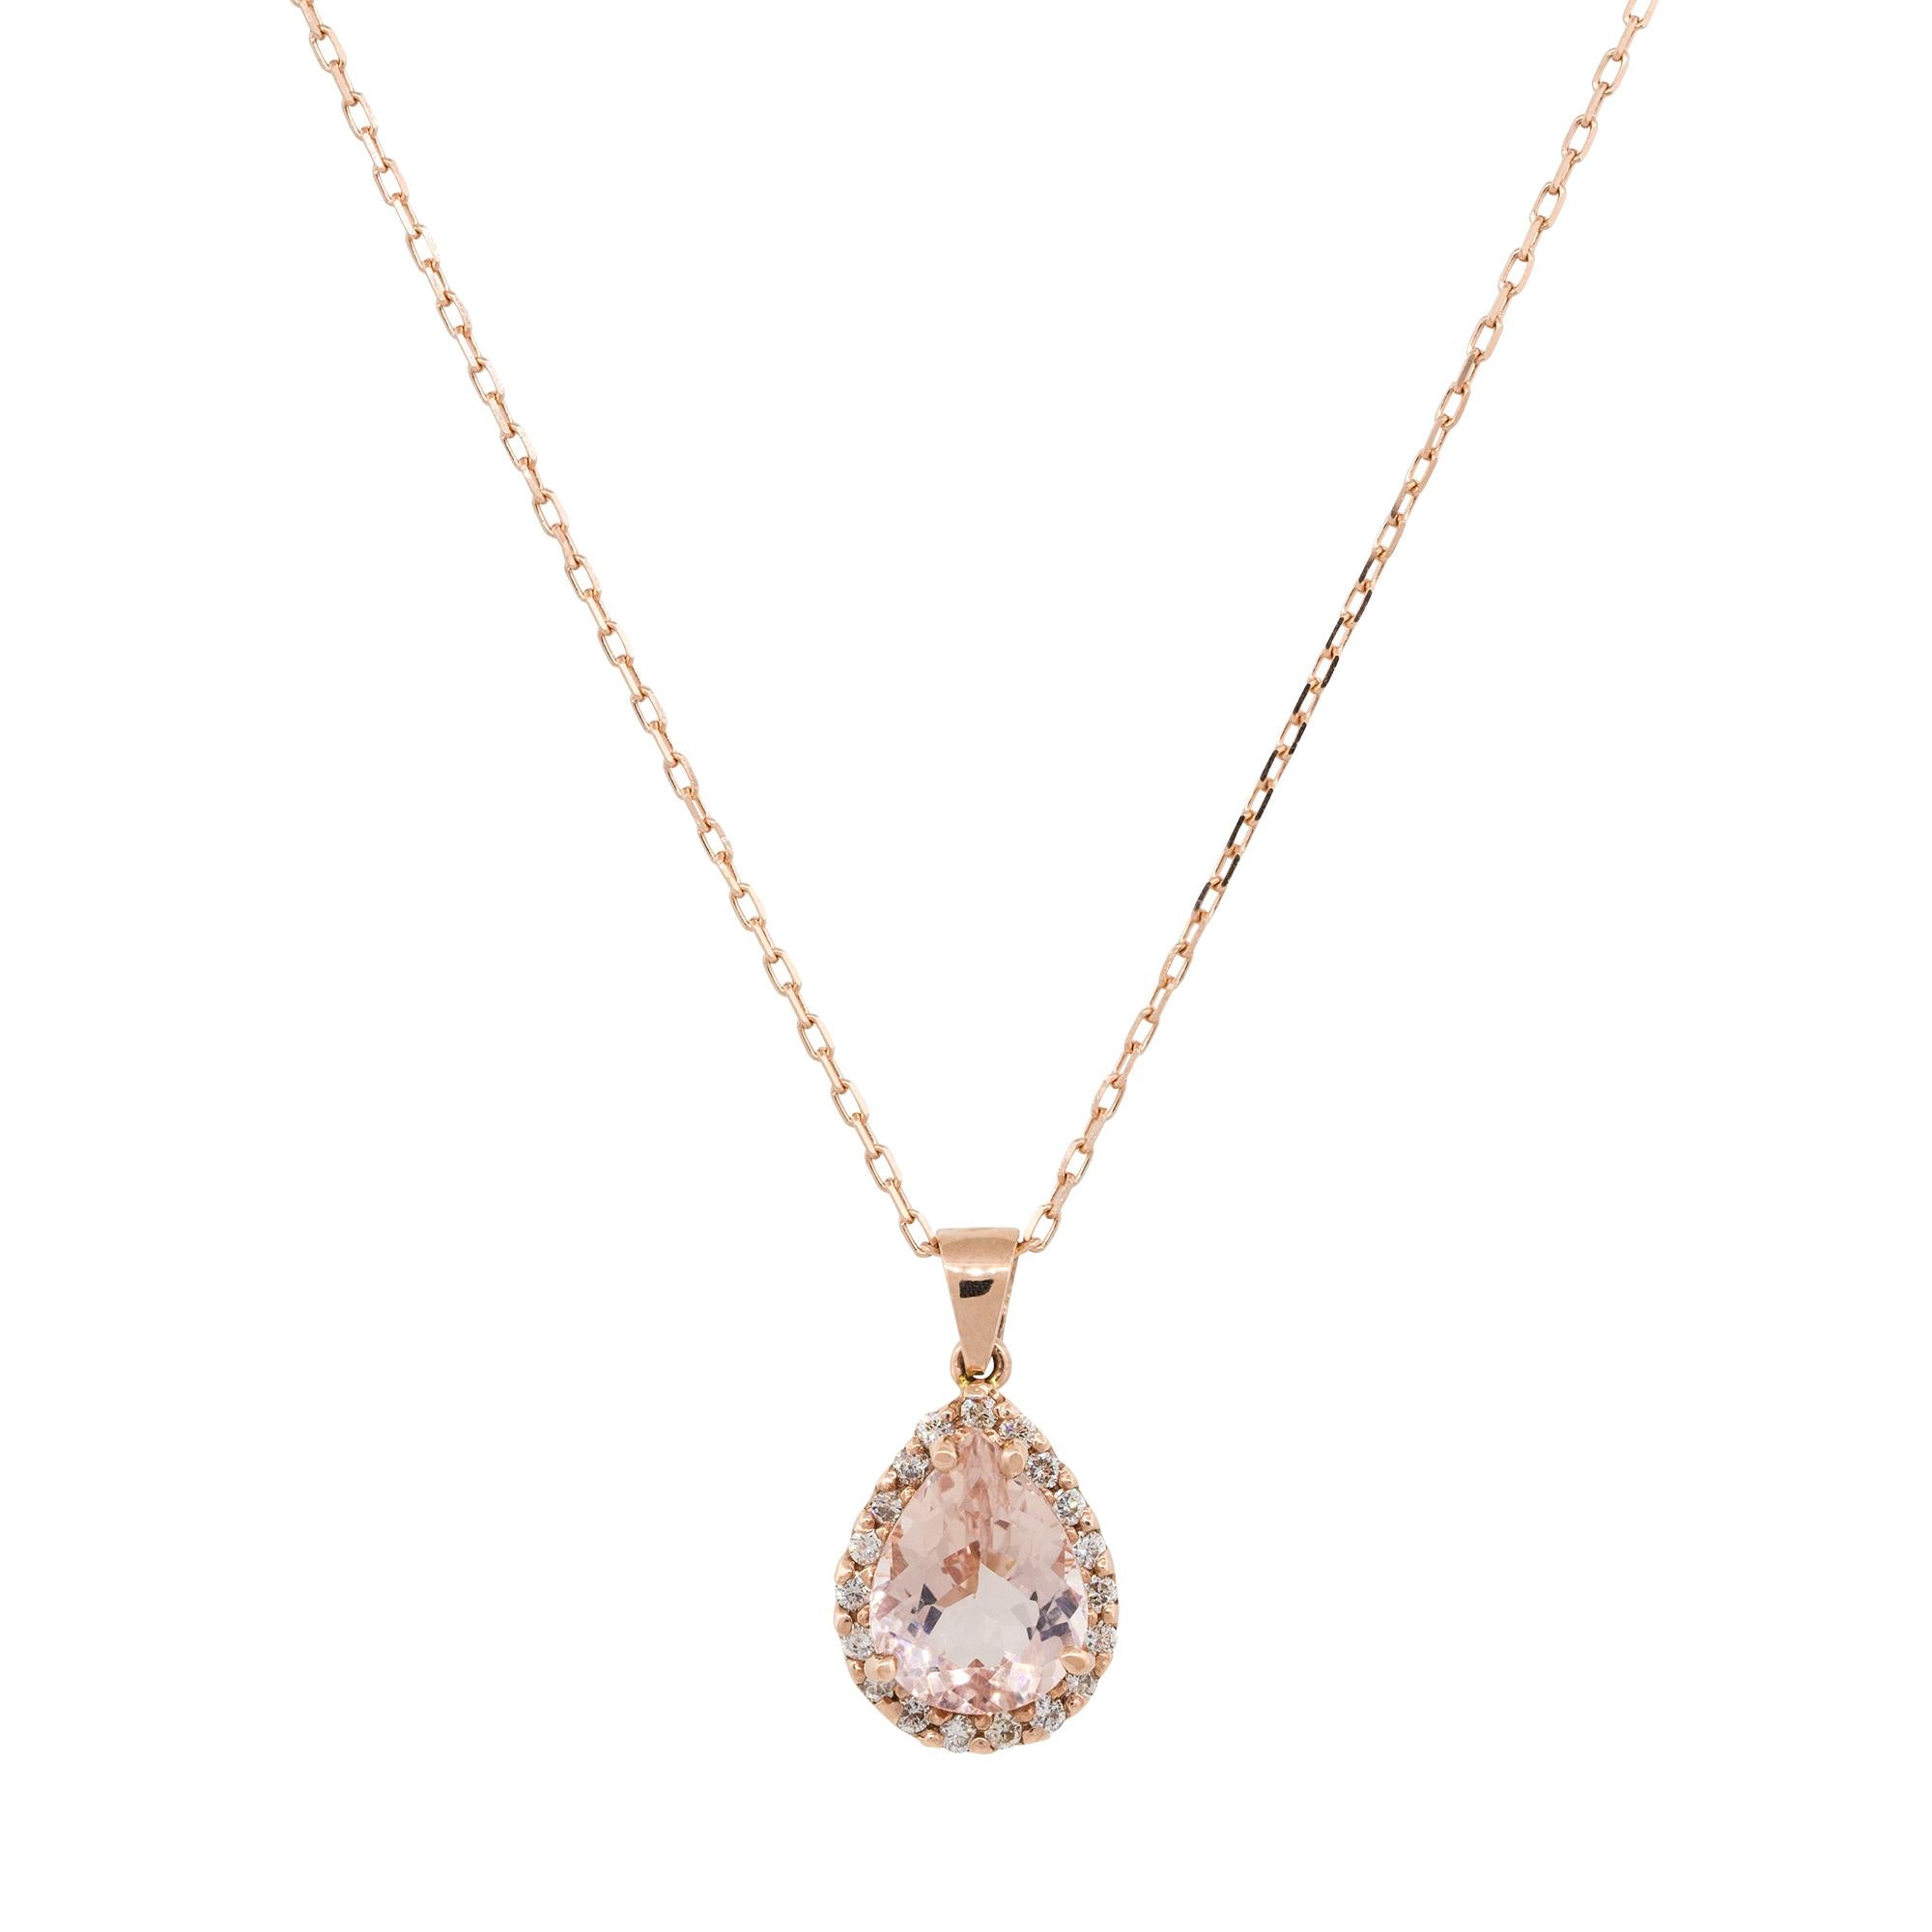 Material: 14k Rose Gold
Diamond Details: Approx. 0.28ctw of round cut Diamonds. Diamonds are G/H in color and VS in clarity
Gemstone Details: Approx. 2.95ctw pear shape Morganite gemstone
Clasps: Lobster clasp
Total Weight: 4.3g (2.8dwt)
Pendant